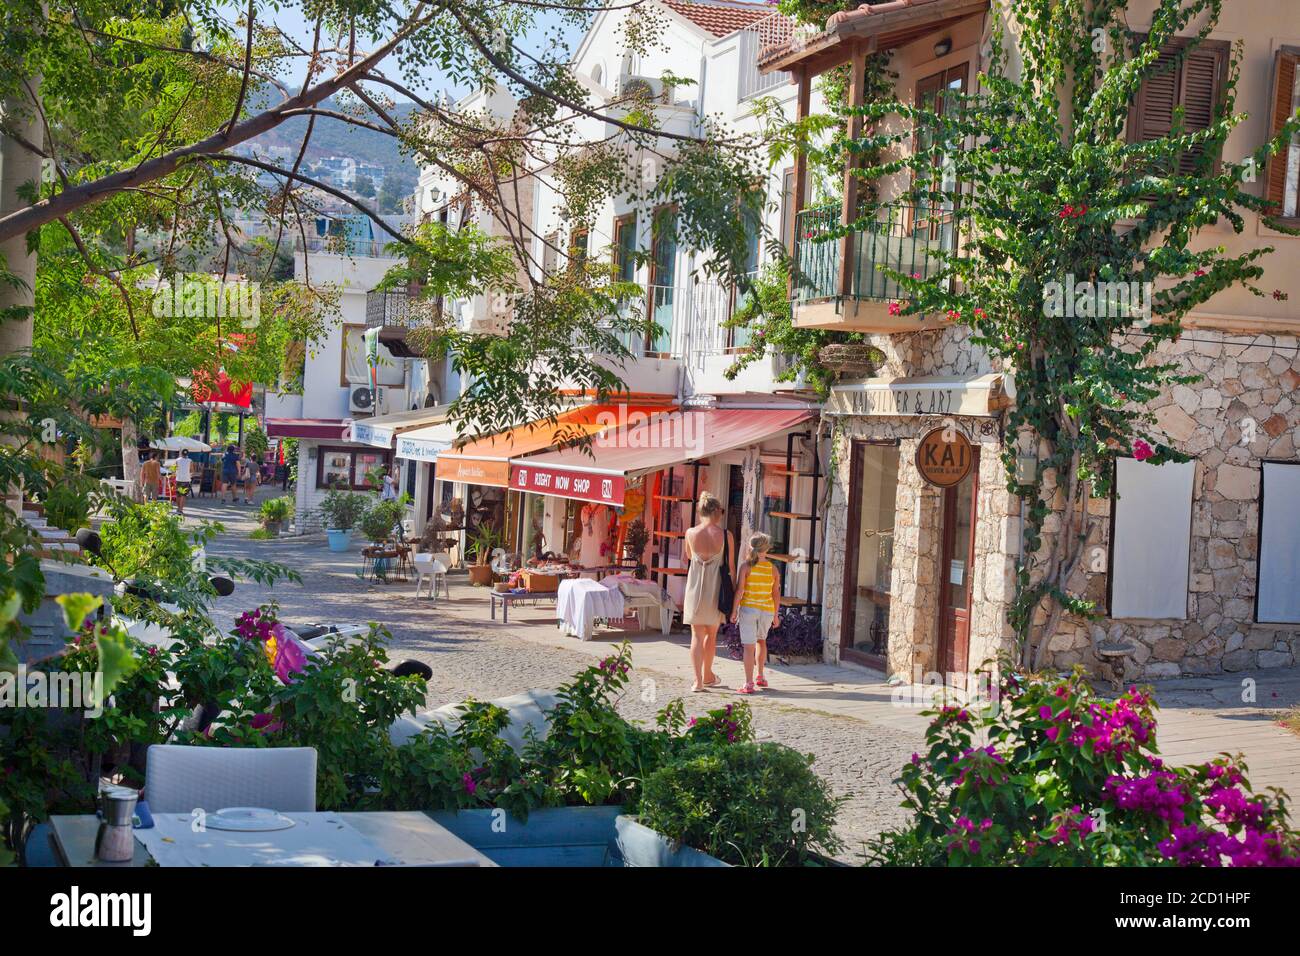 Tourist shops and restaurants line the streets of Kaka, Turkey.  Kalkan is a popular holiday destination and is located on the Turkish Mediterranean c Stock Photo